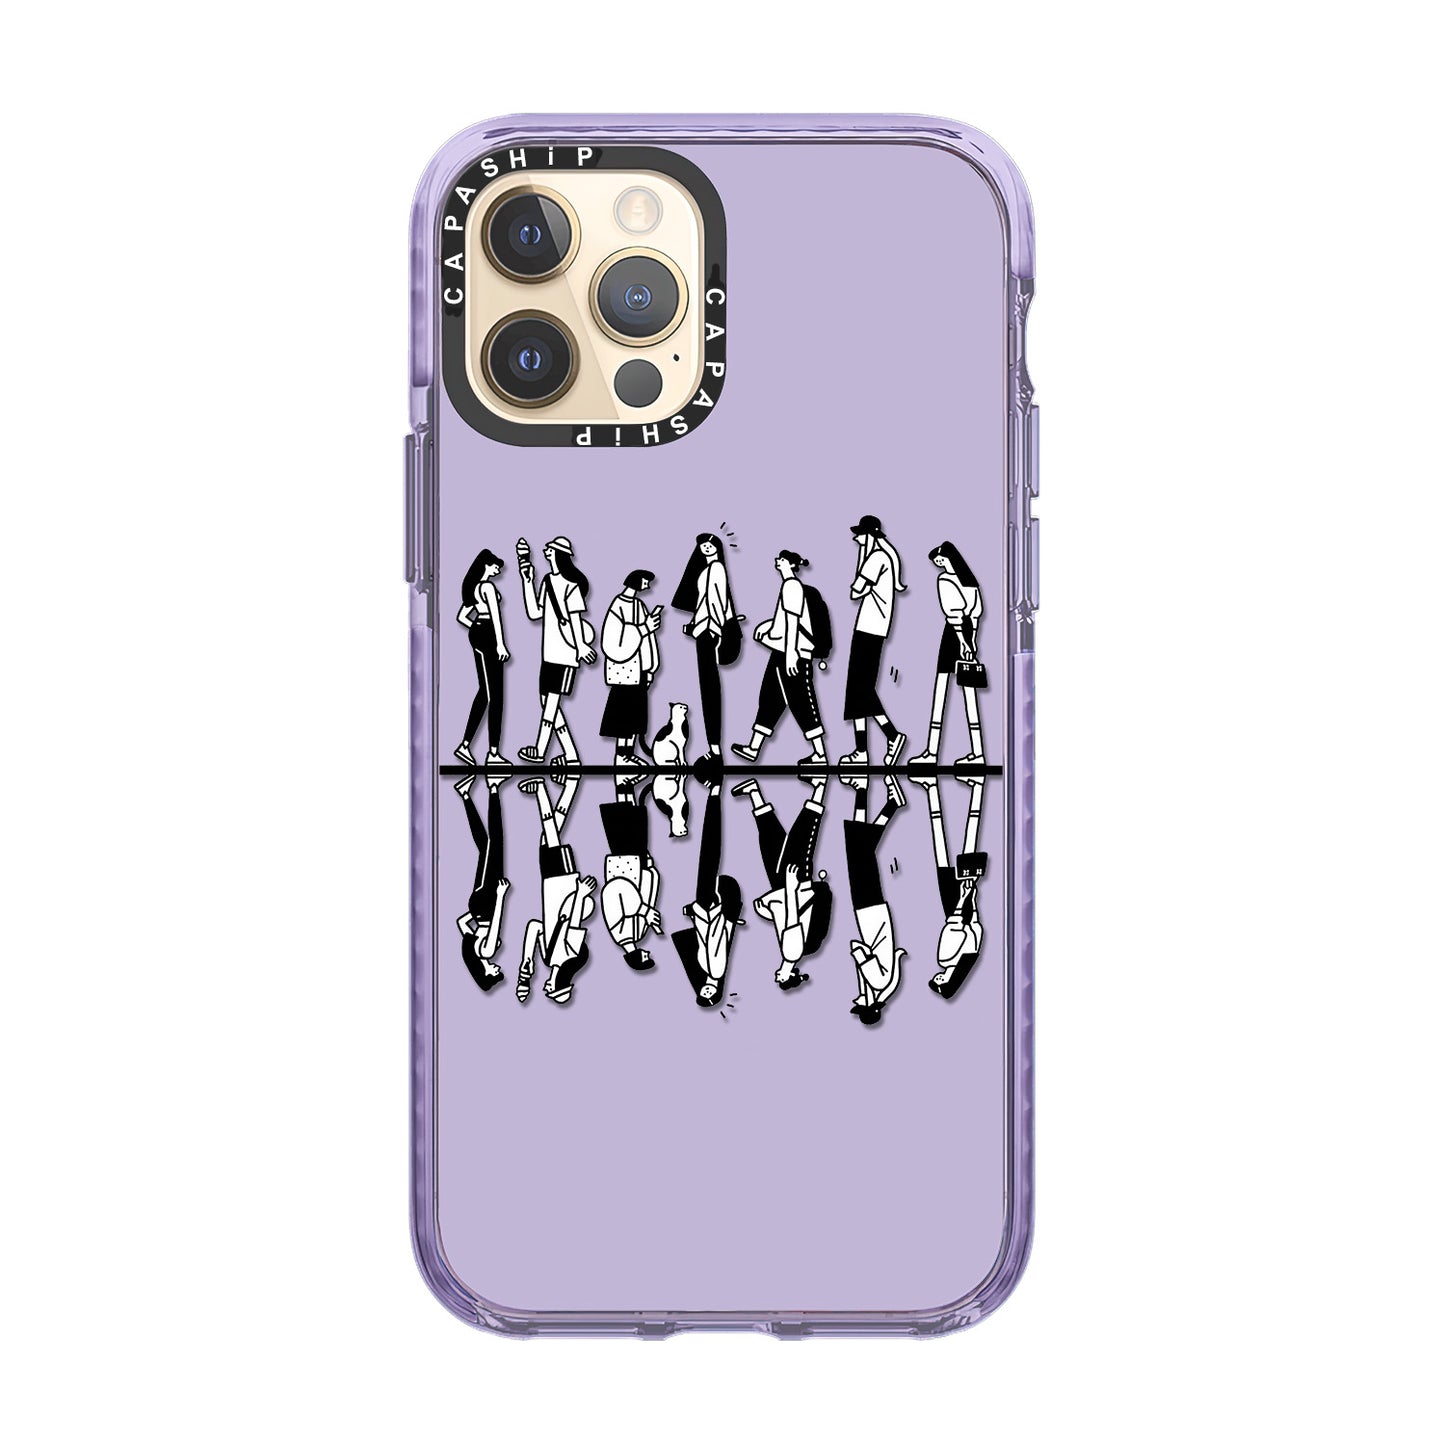 Simple girl phone case for iPhone